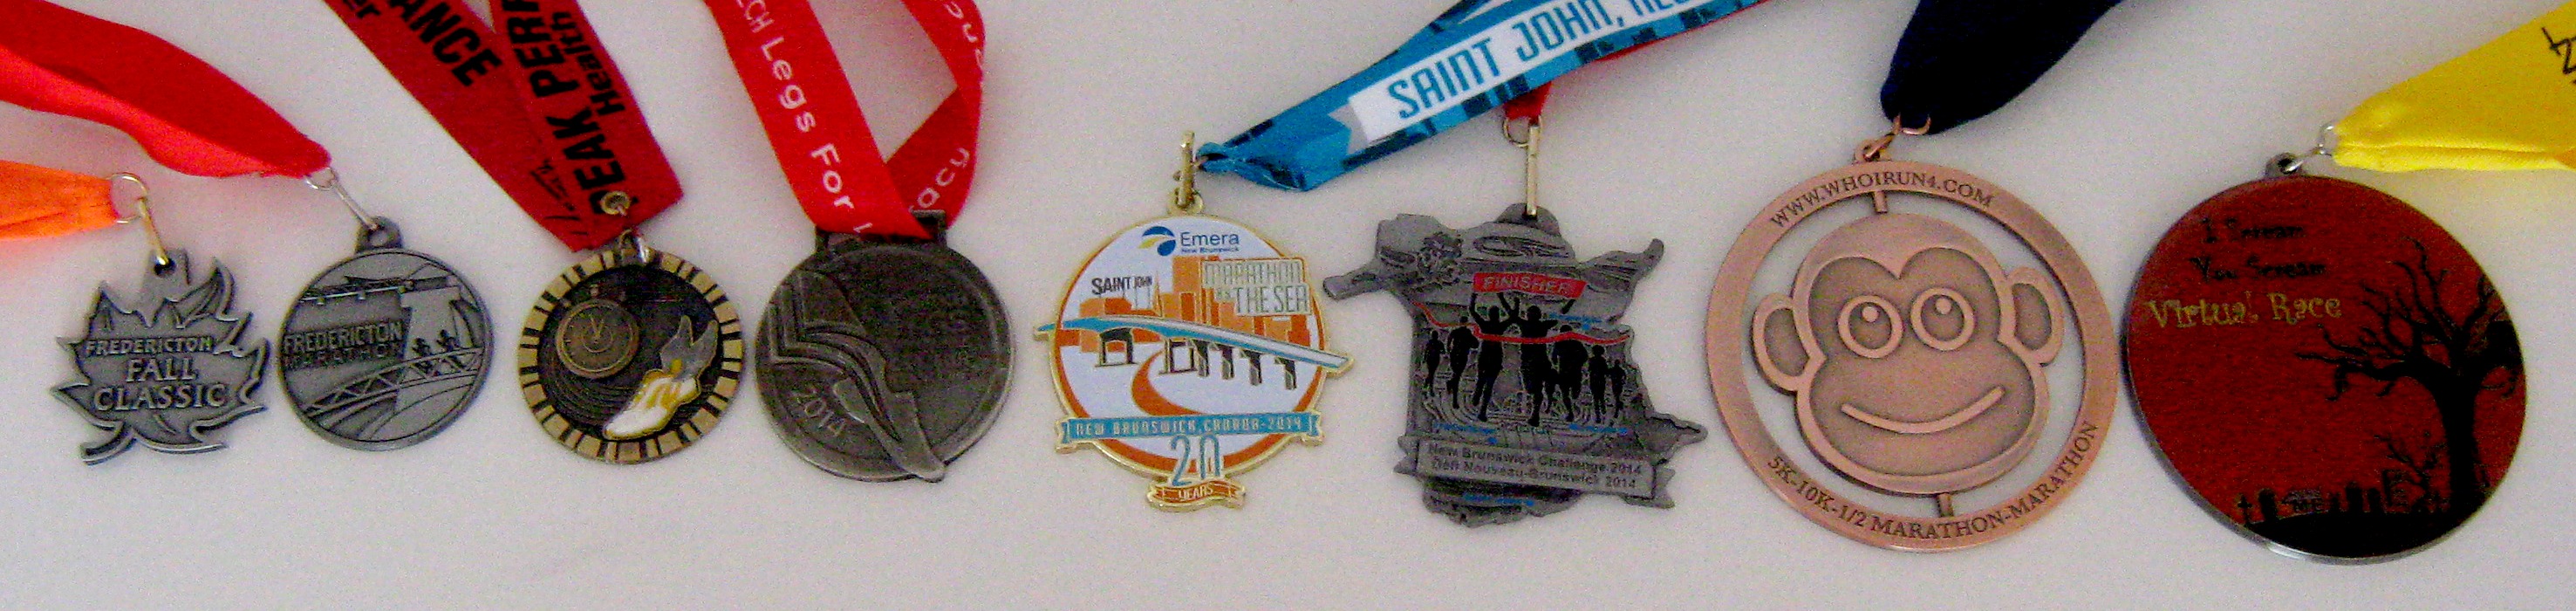 2014 medals for races